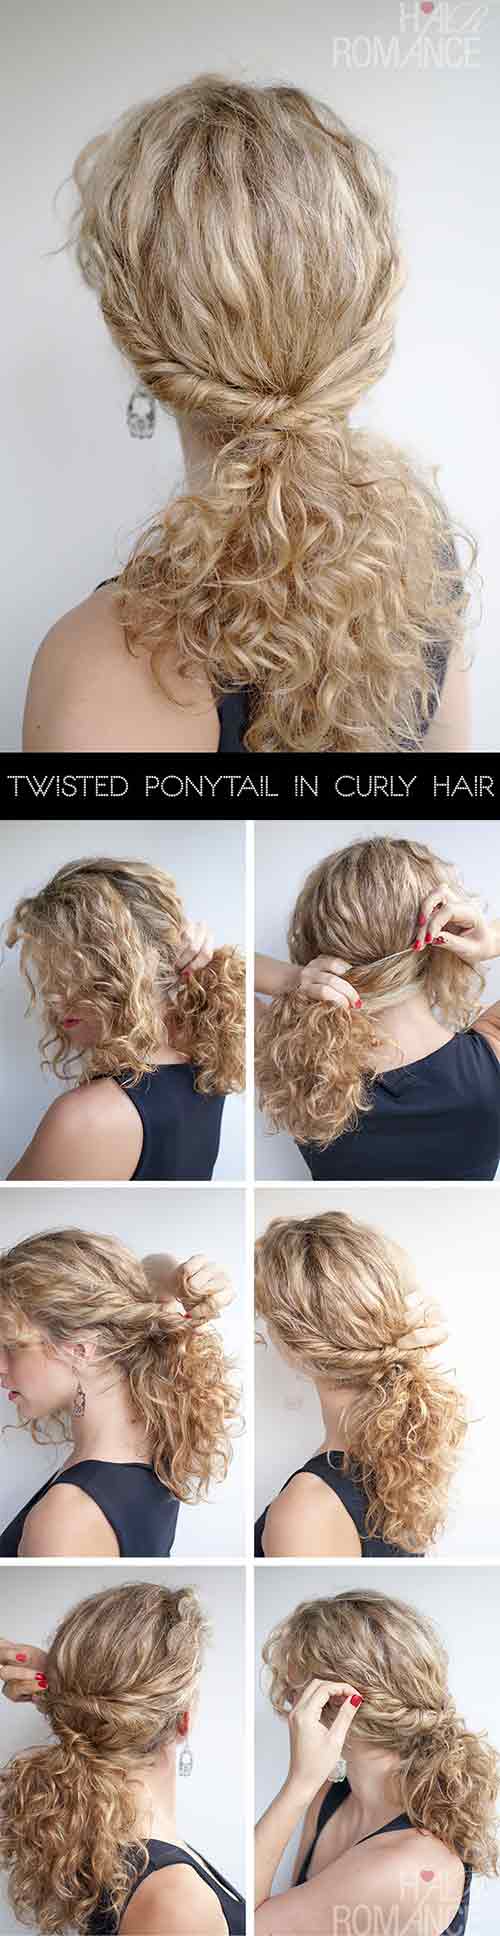 20 amazing hairstyles for curly hair for girls